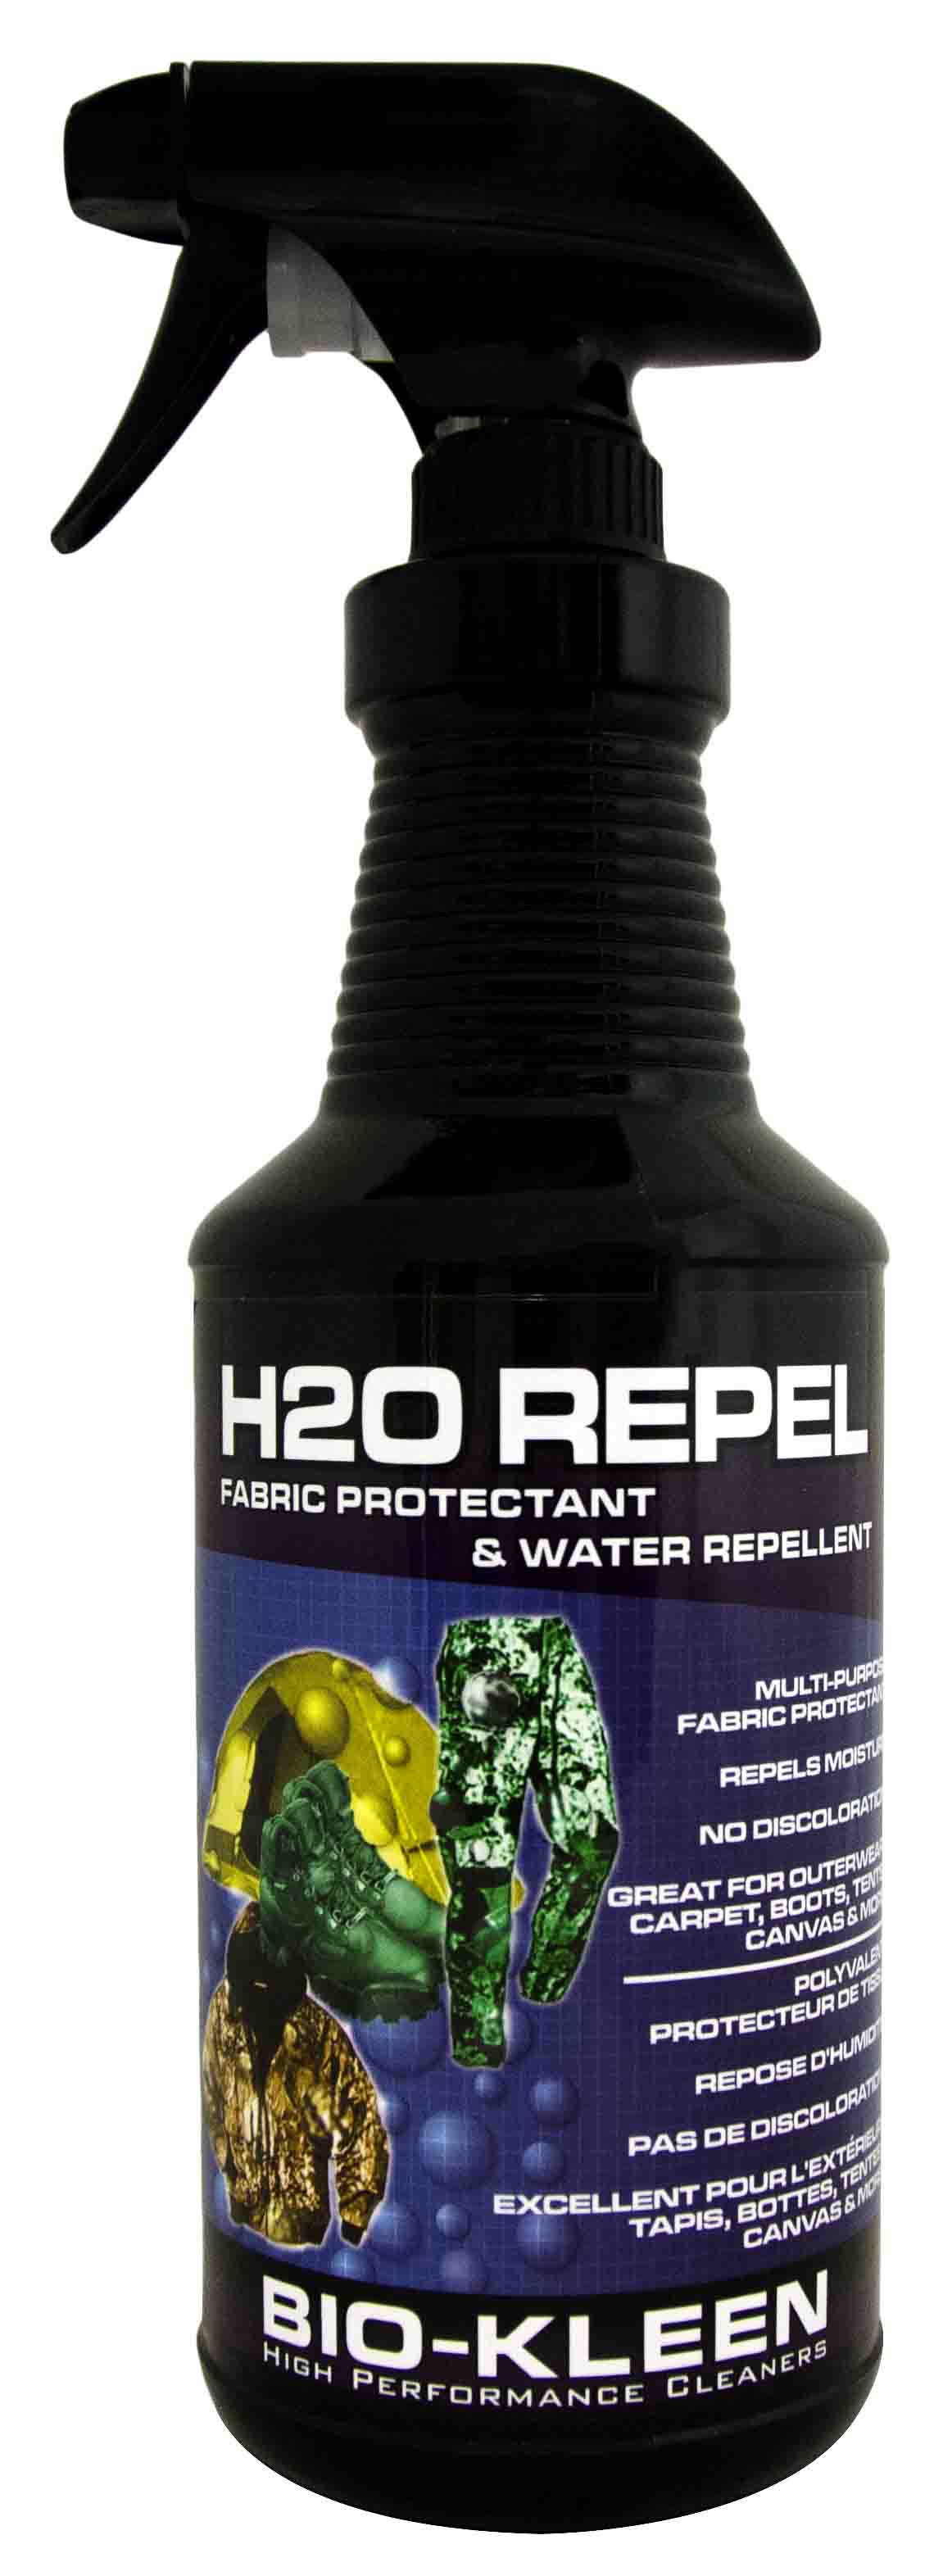 Water & Stain Repellent spray for dyeables fabrics and leather products.